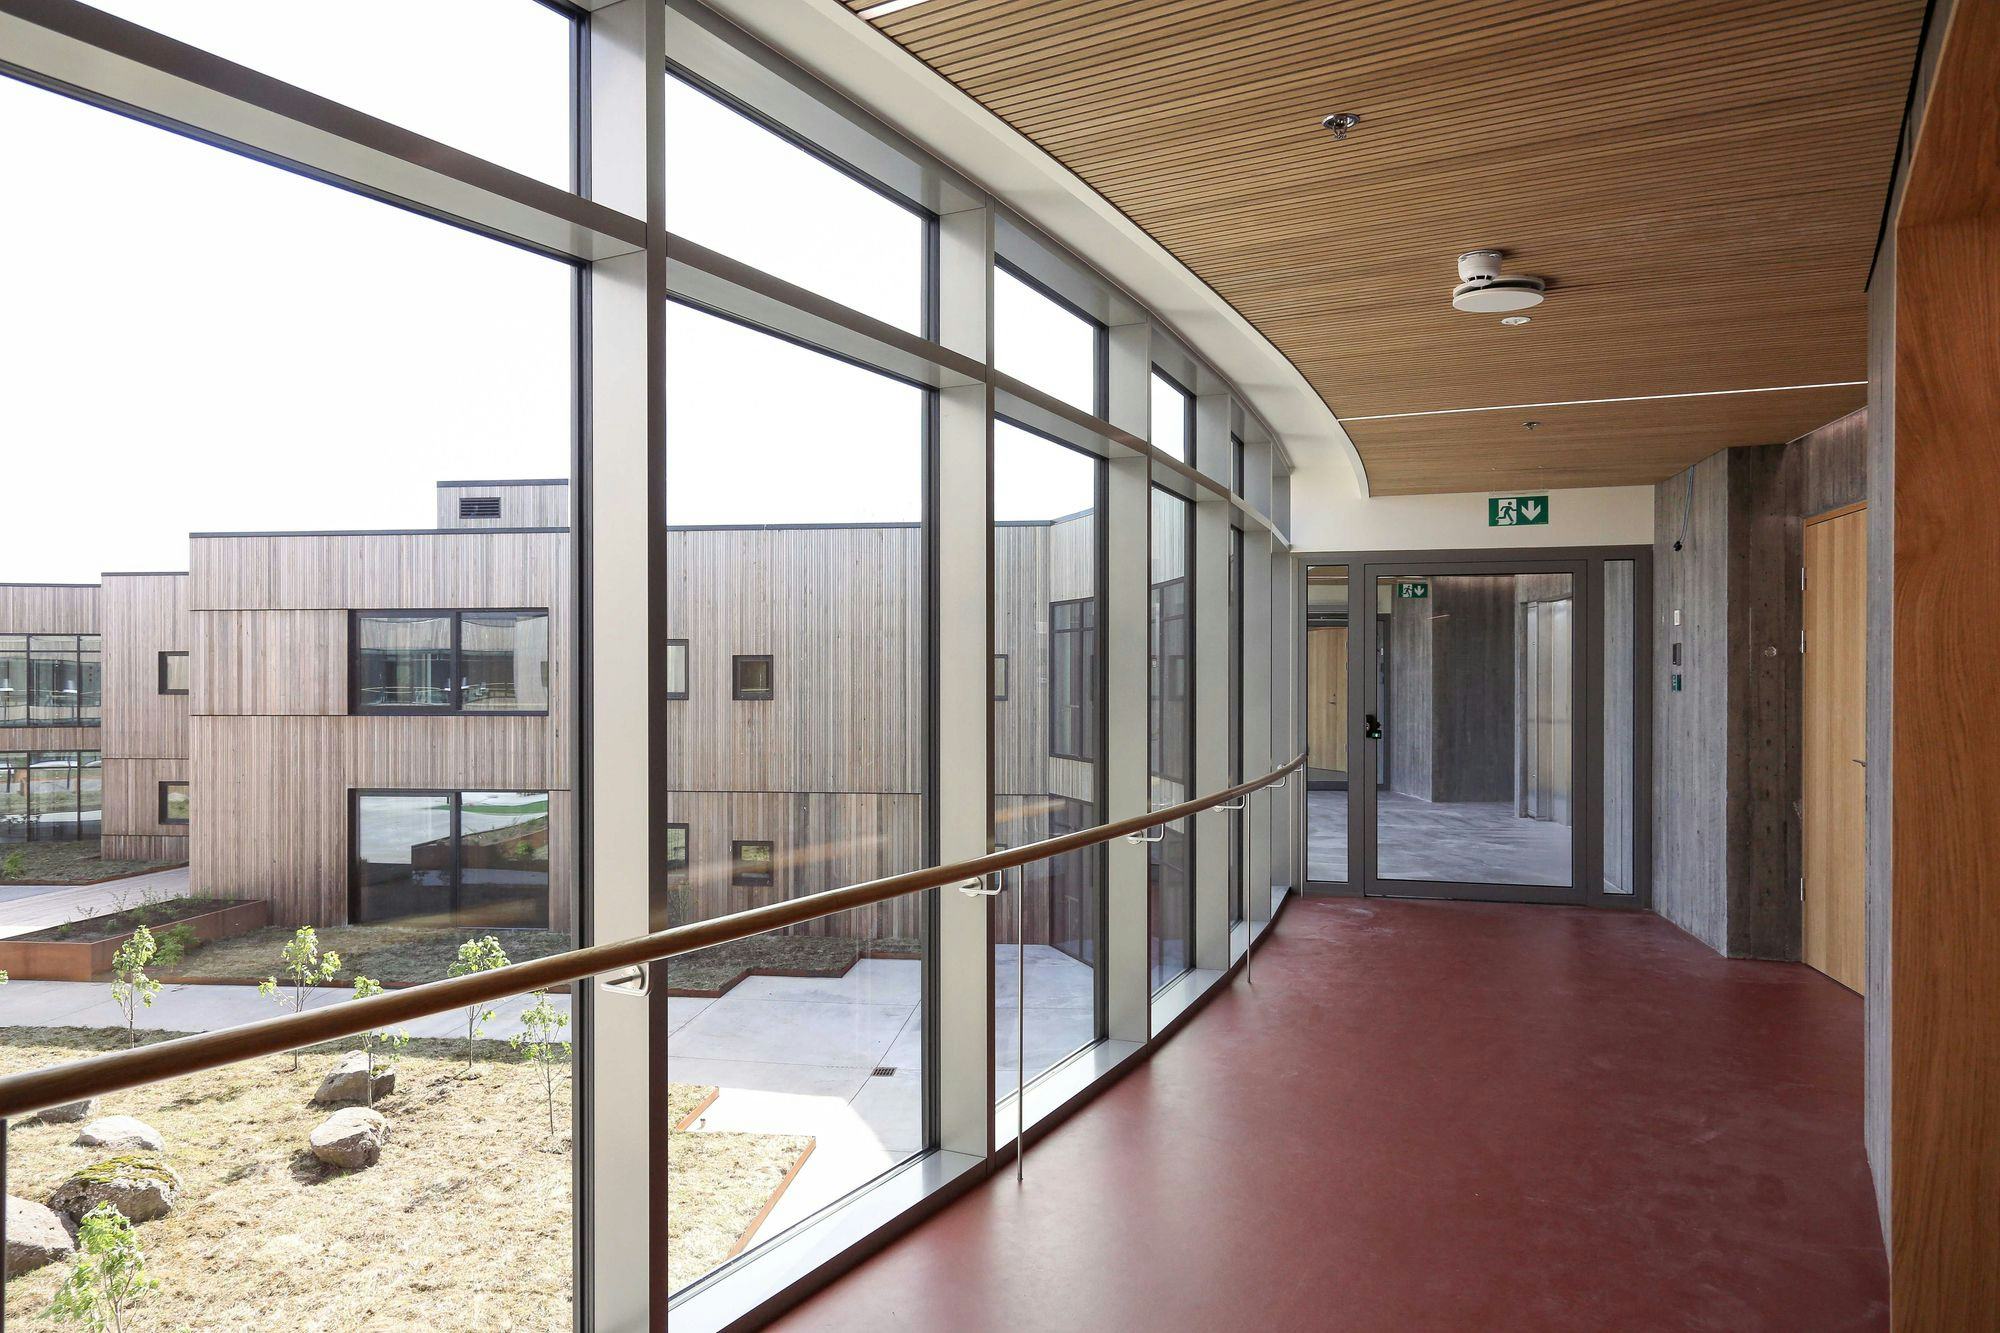 An interior corridor with a curved glass wall on one side, offering view of a courtyard